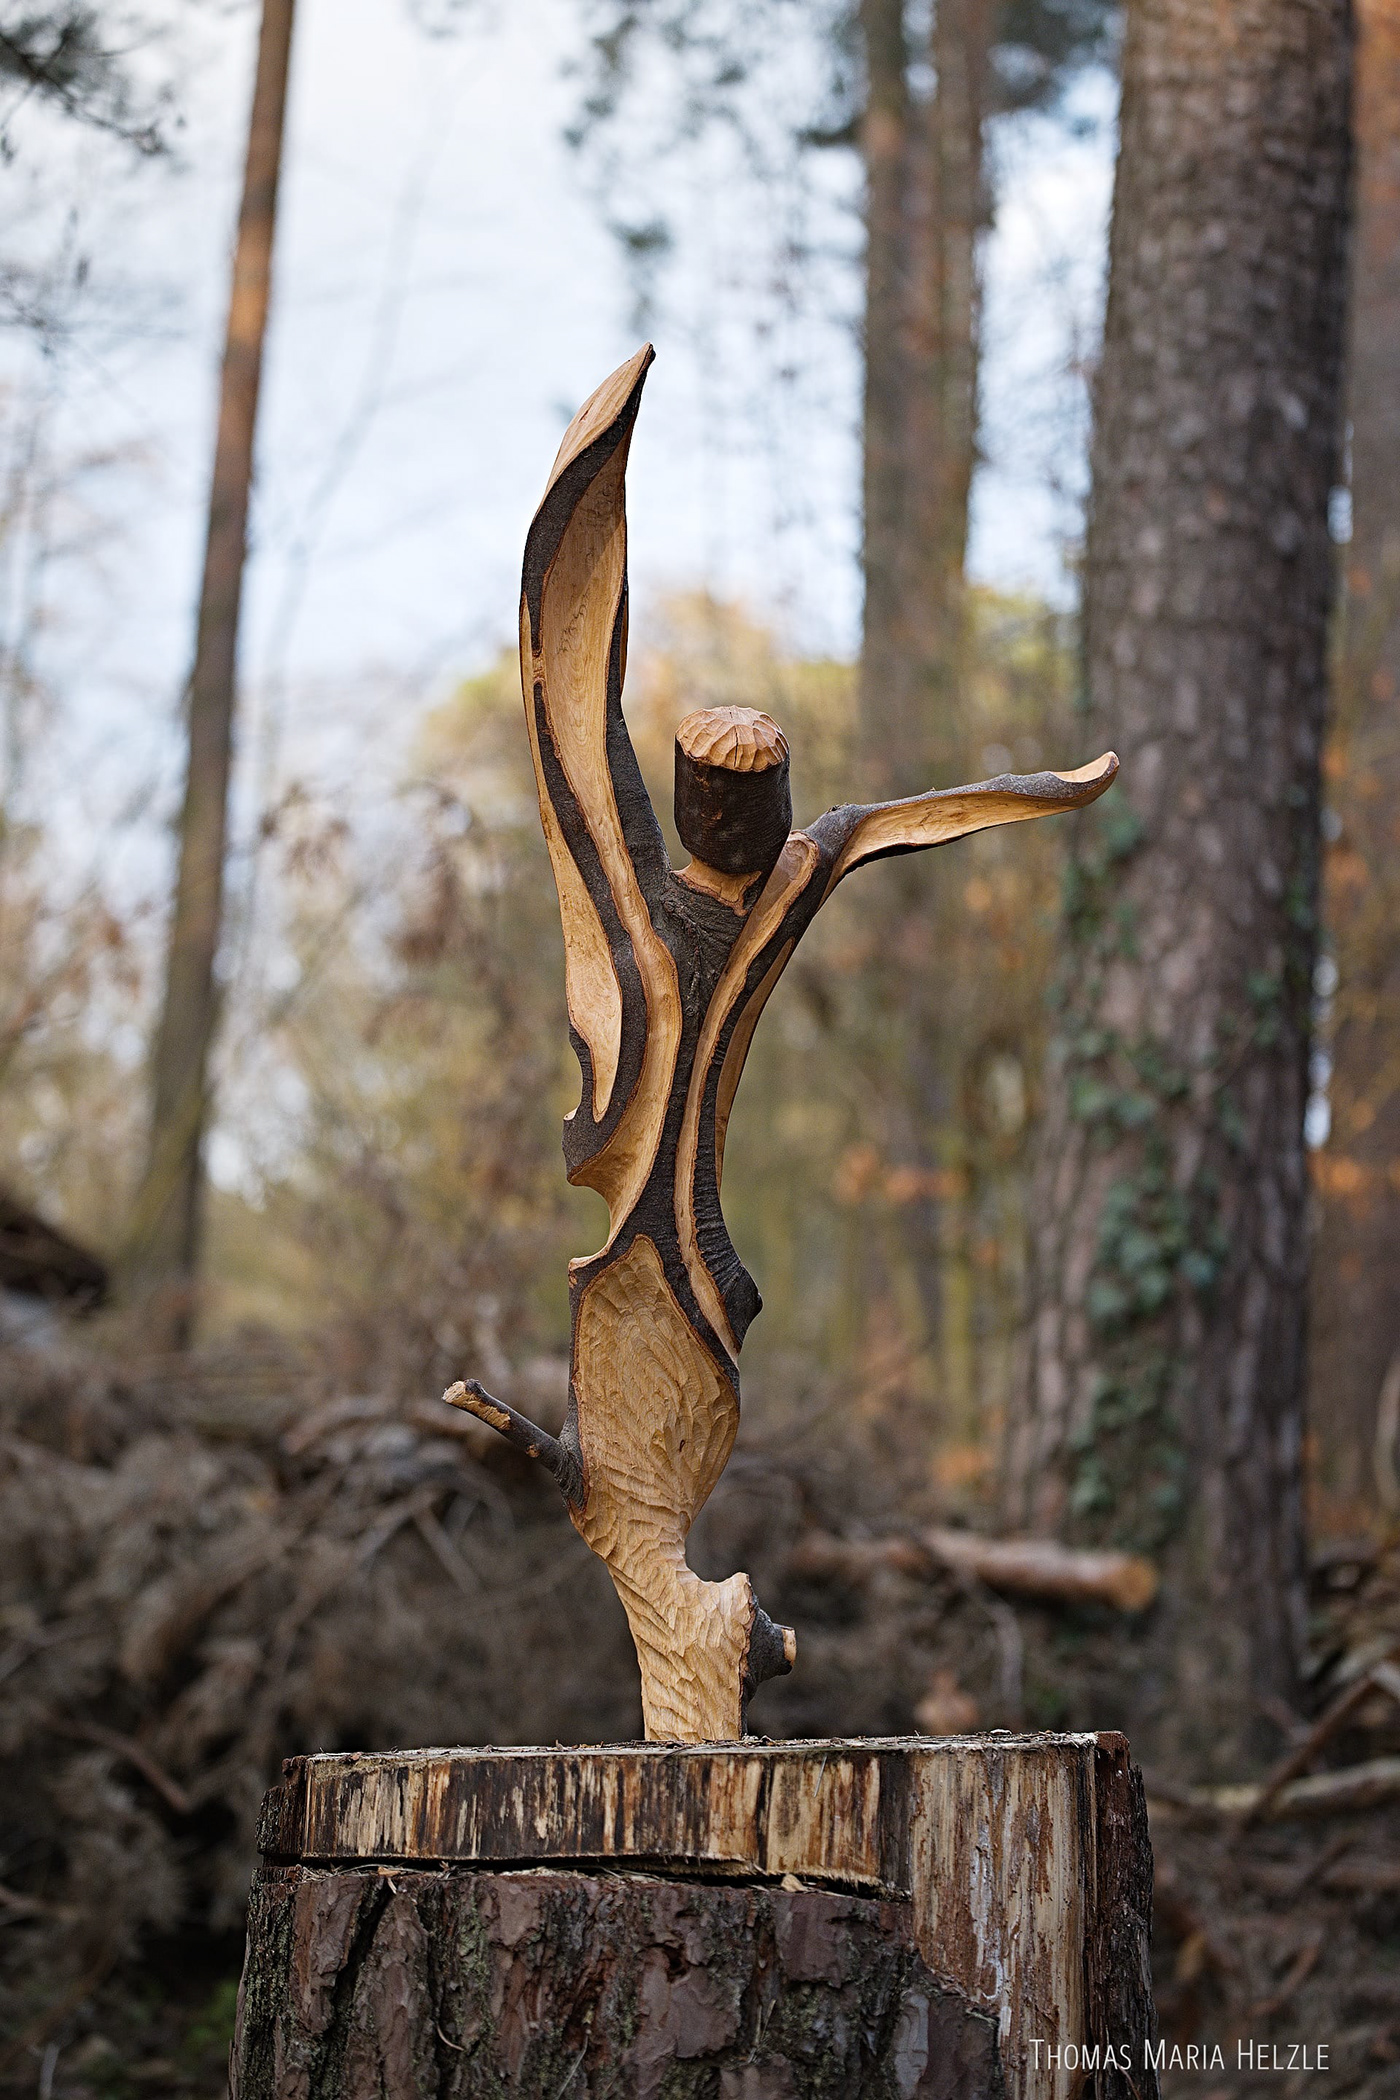 Frontal view of the Dancer sculpture mounted on the stump of a pine tree in the woods